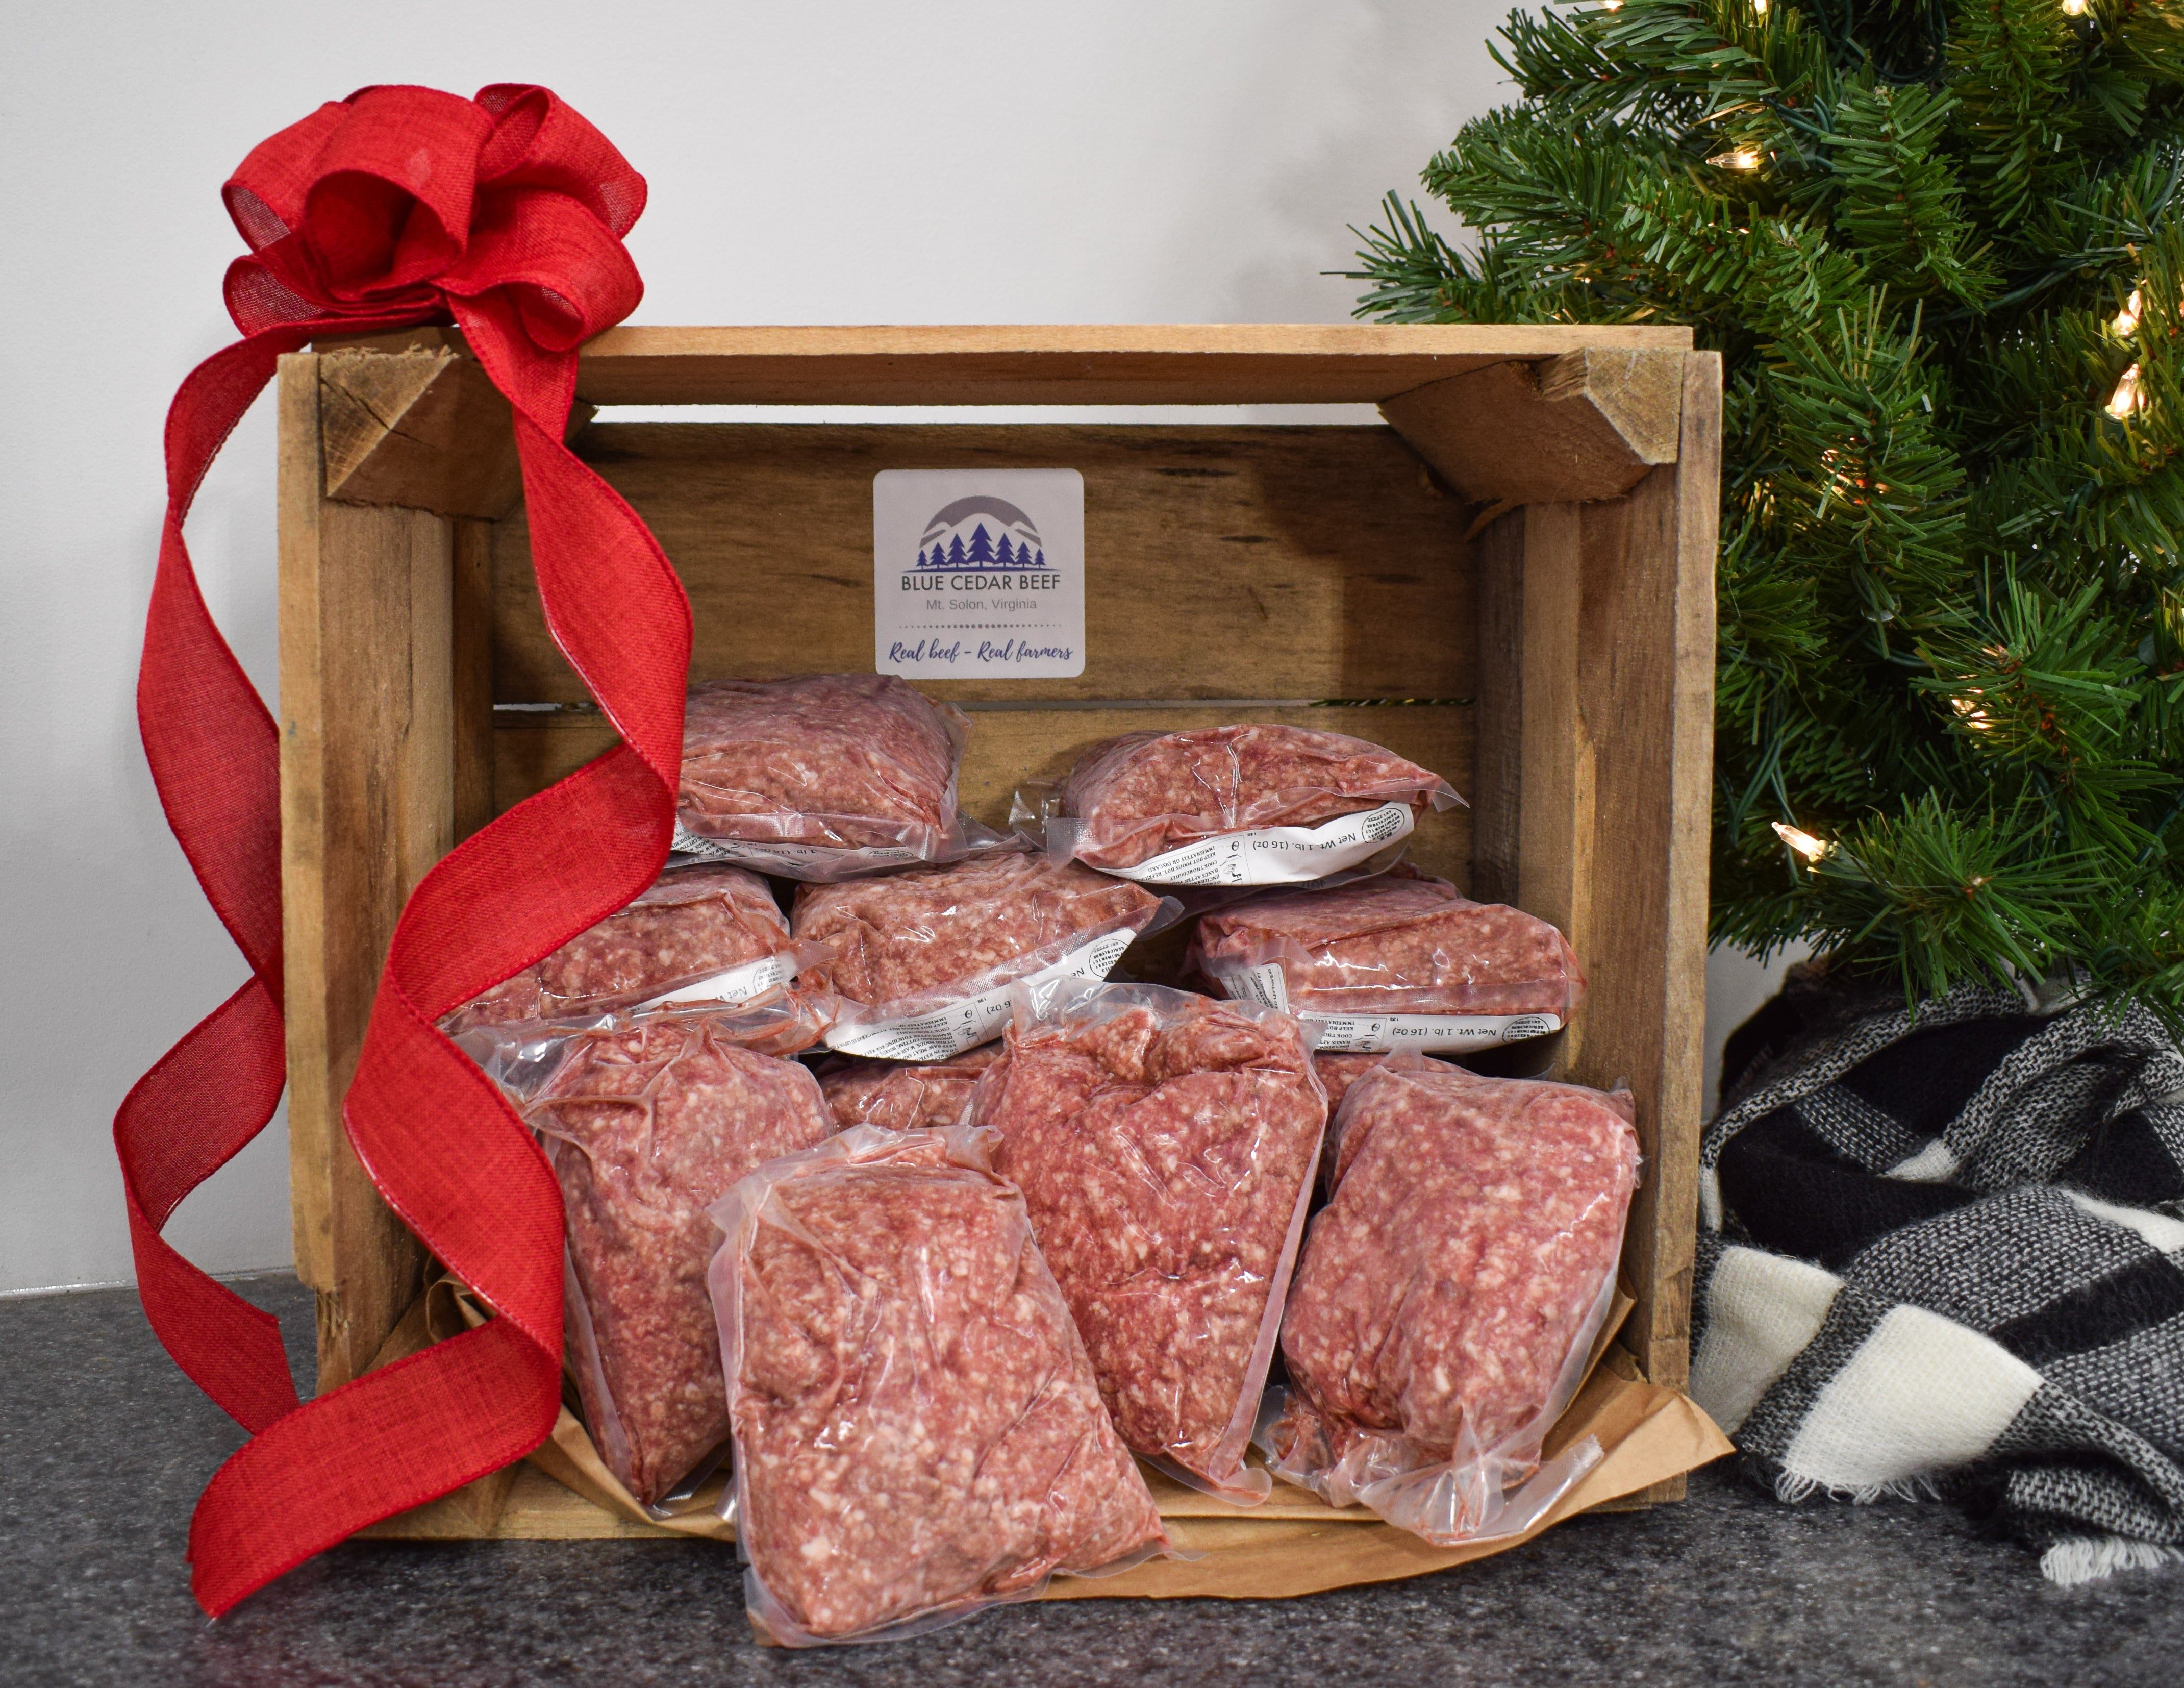 Clark Griswold's Holiday Beef Bundle